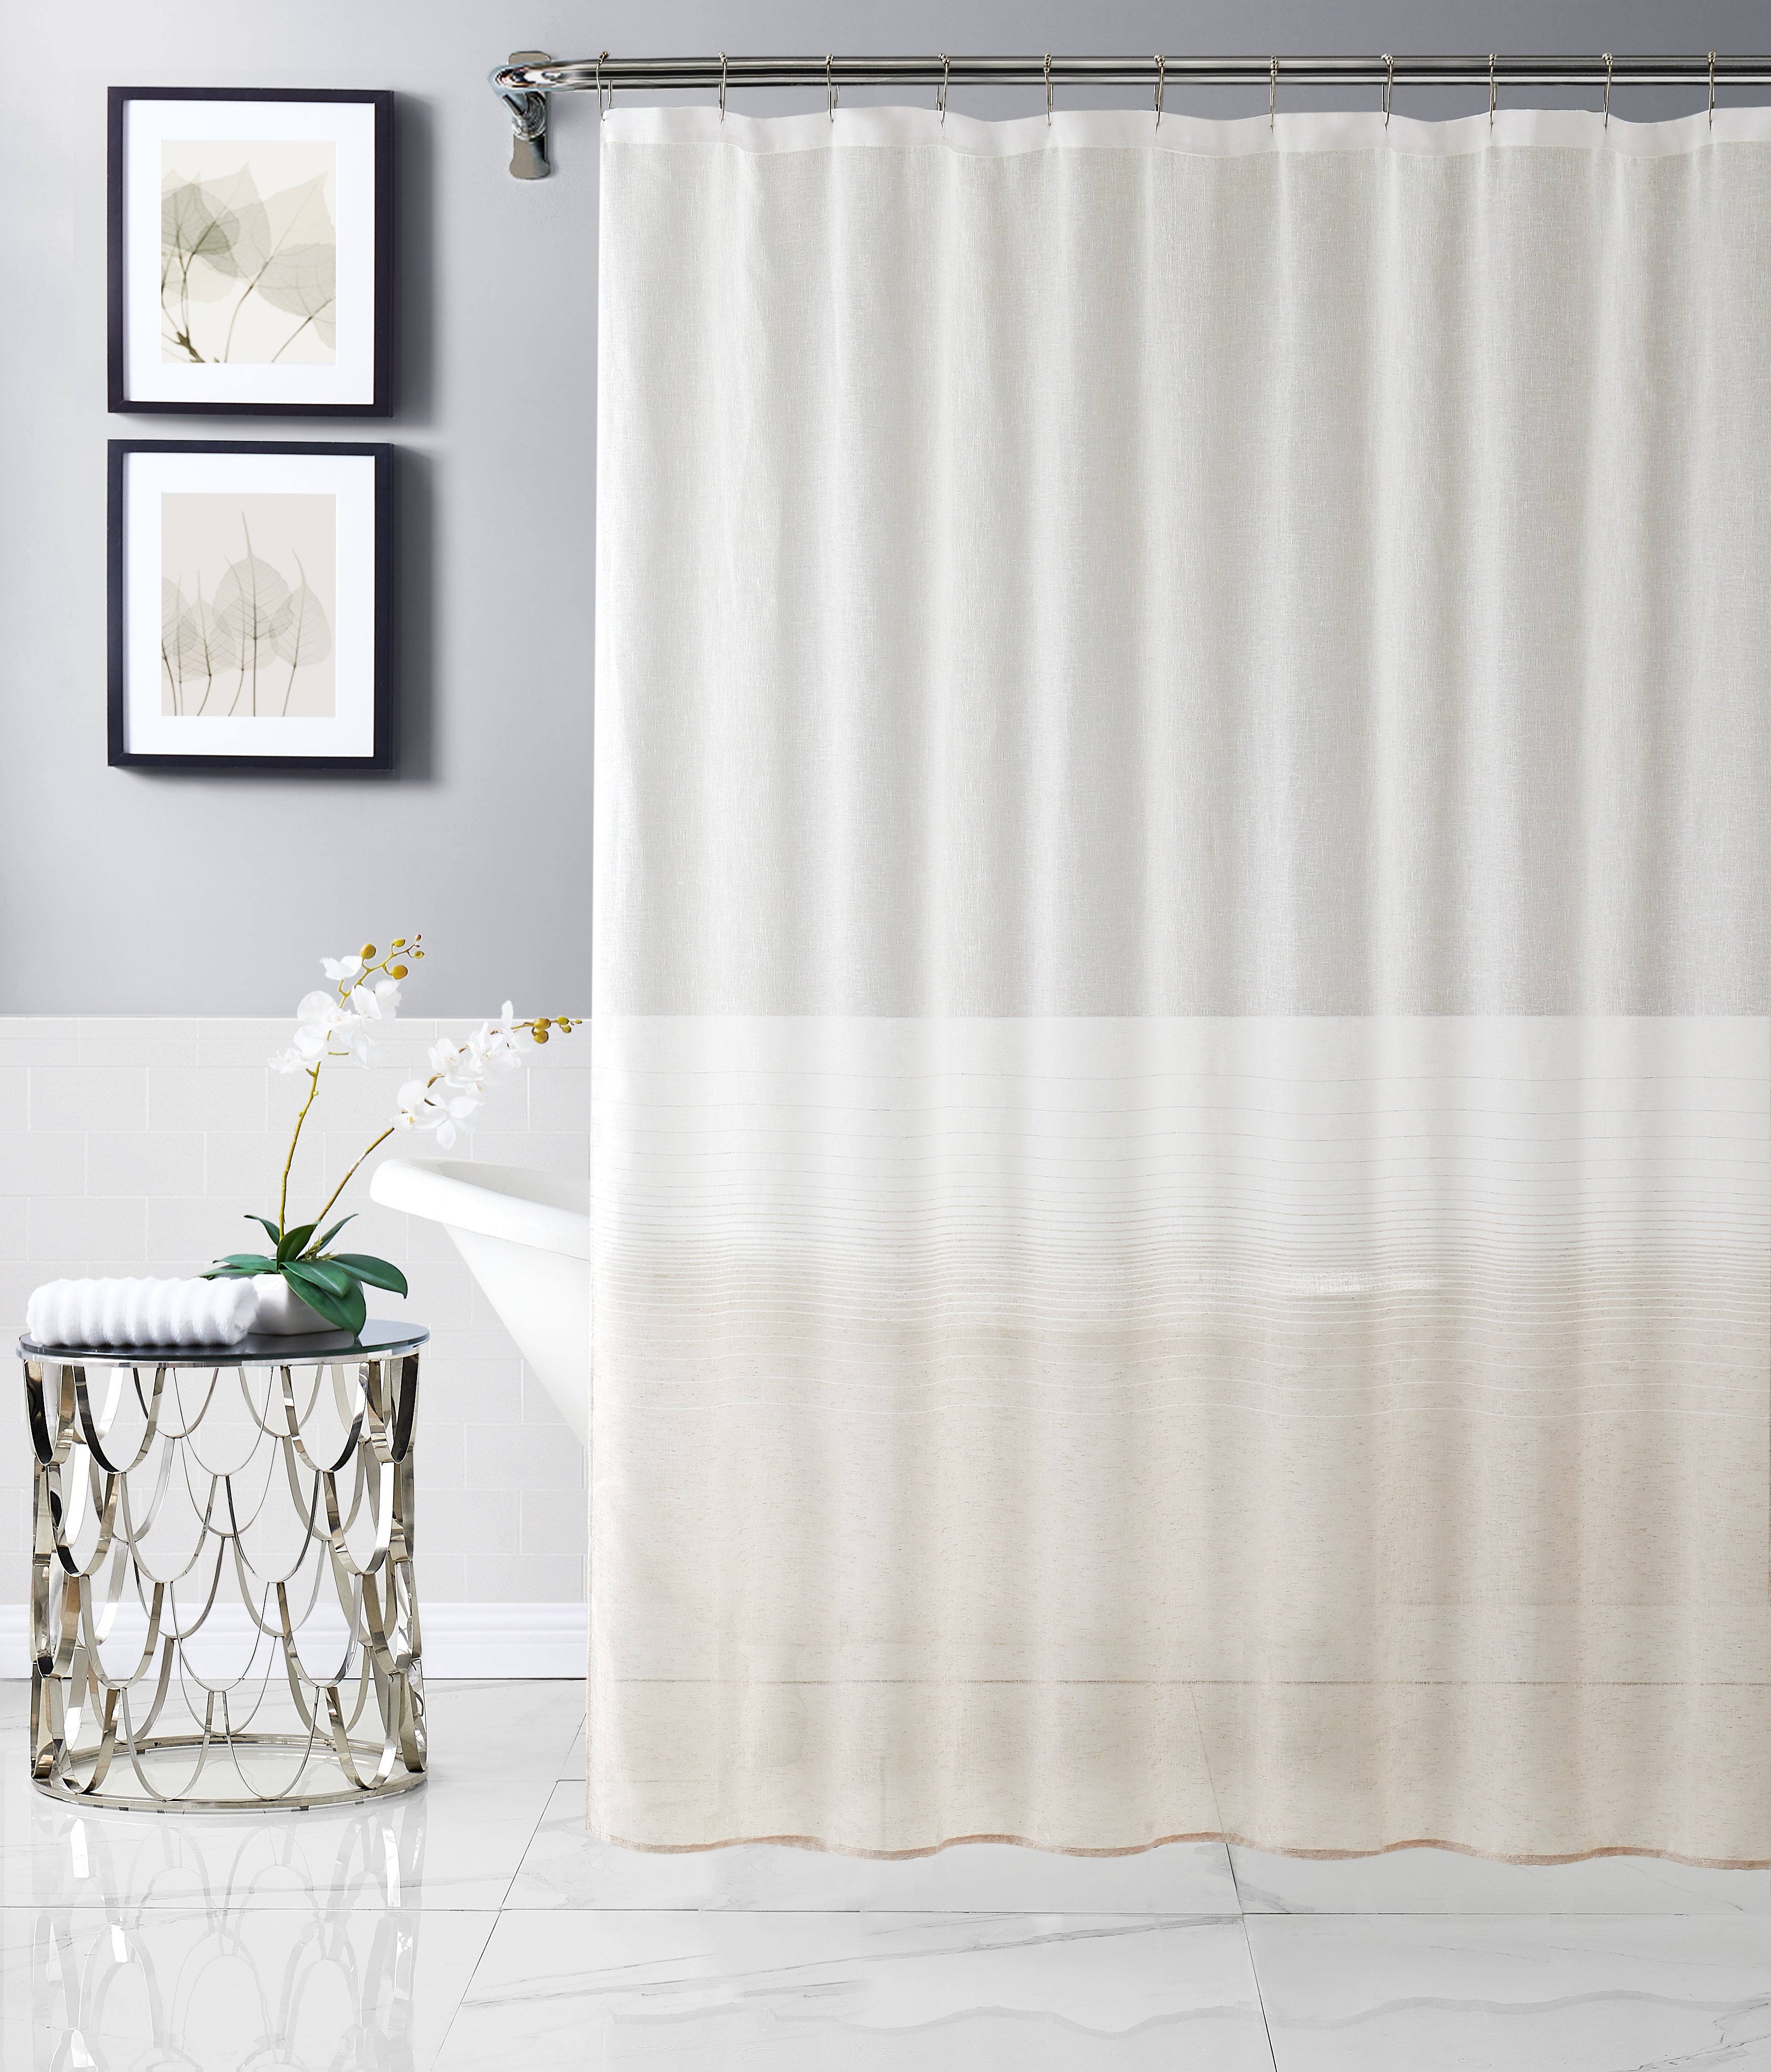 Dainty Home Linea 3D Ombre Textured Weaved Linen Look Striped Designed Fabric Shower Curtain